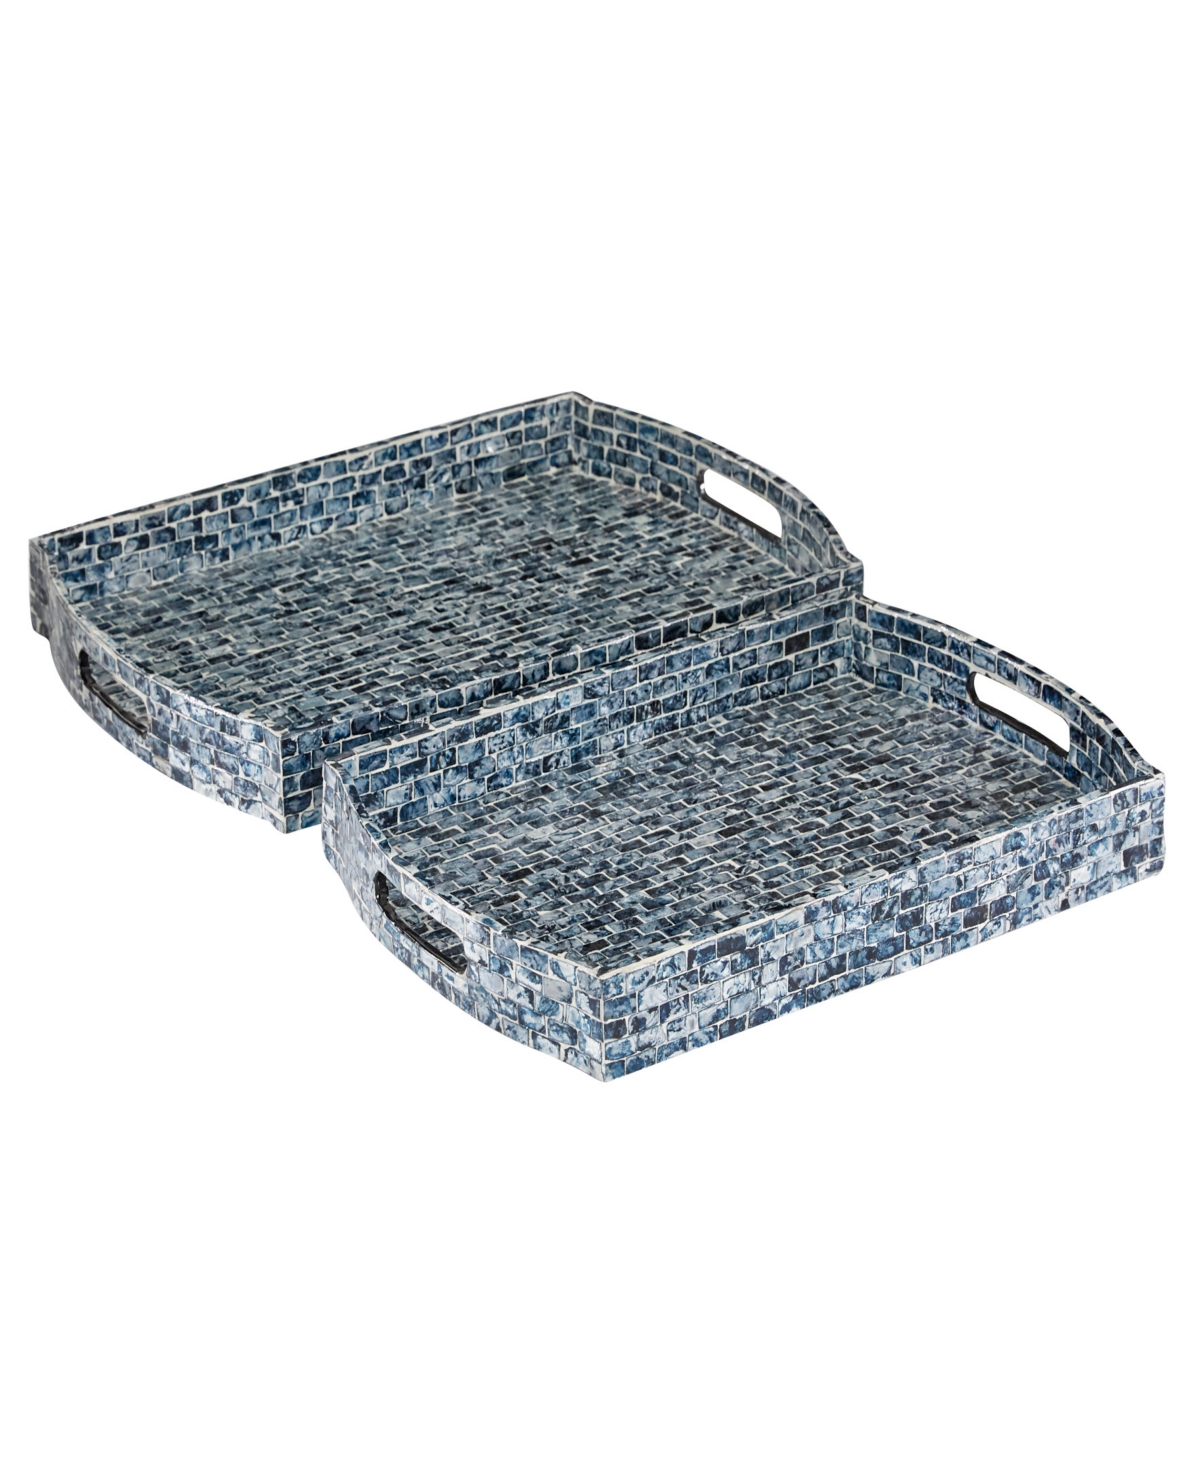 Rosemary Lane Mother Of Pearl Tray With Slot Handles, Set Of 2, 20", 18" W In Blue